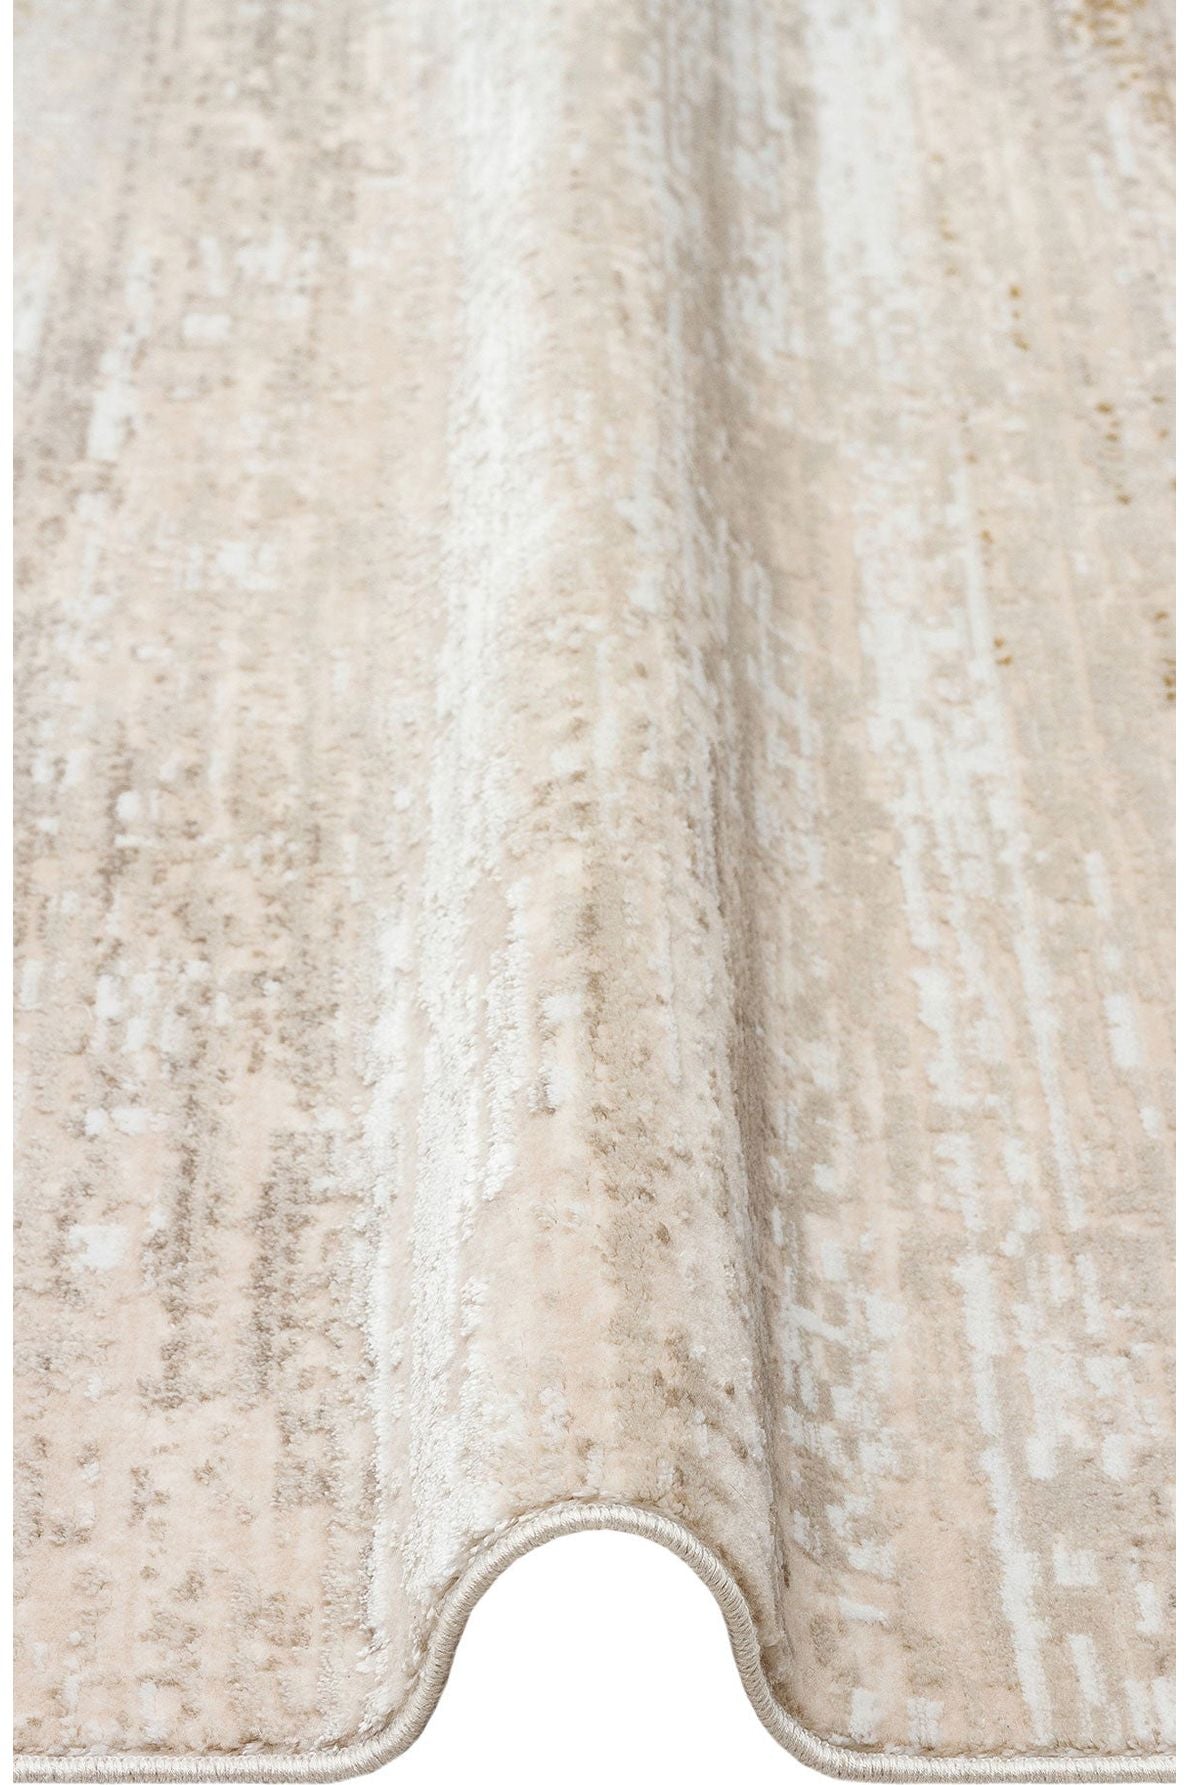 #Turkish_Carpets_Rugs# #Modern_Carpets# #Abrash_Carpets#Elegant Rugs With Acrylic And PolyesterZrh 01 Cream Beige